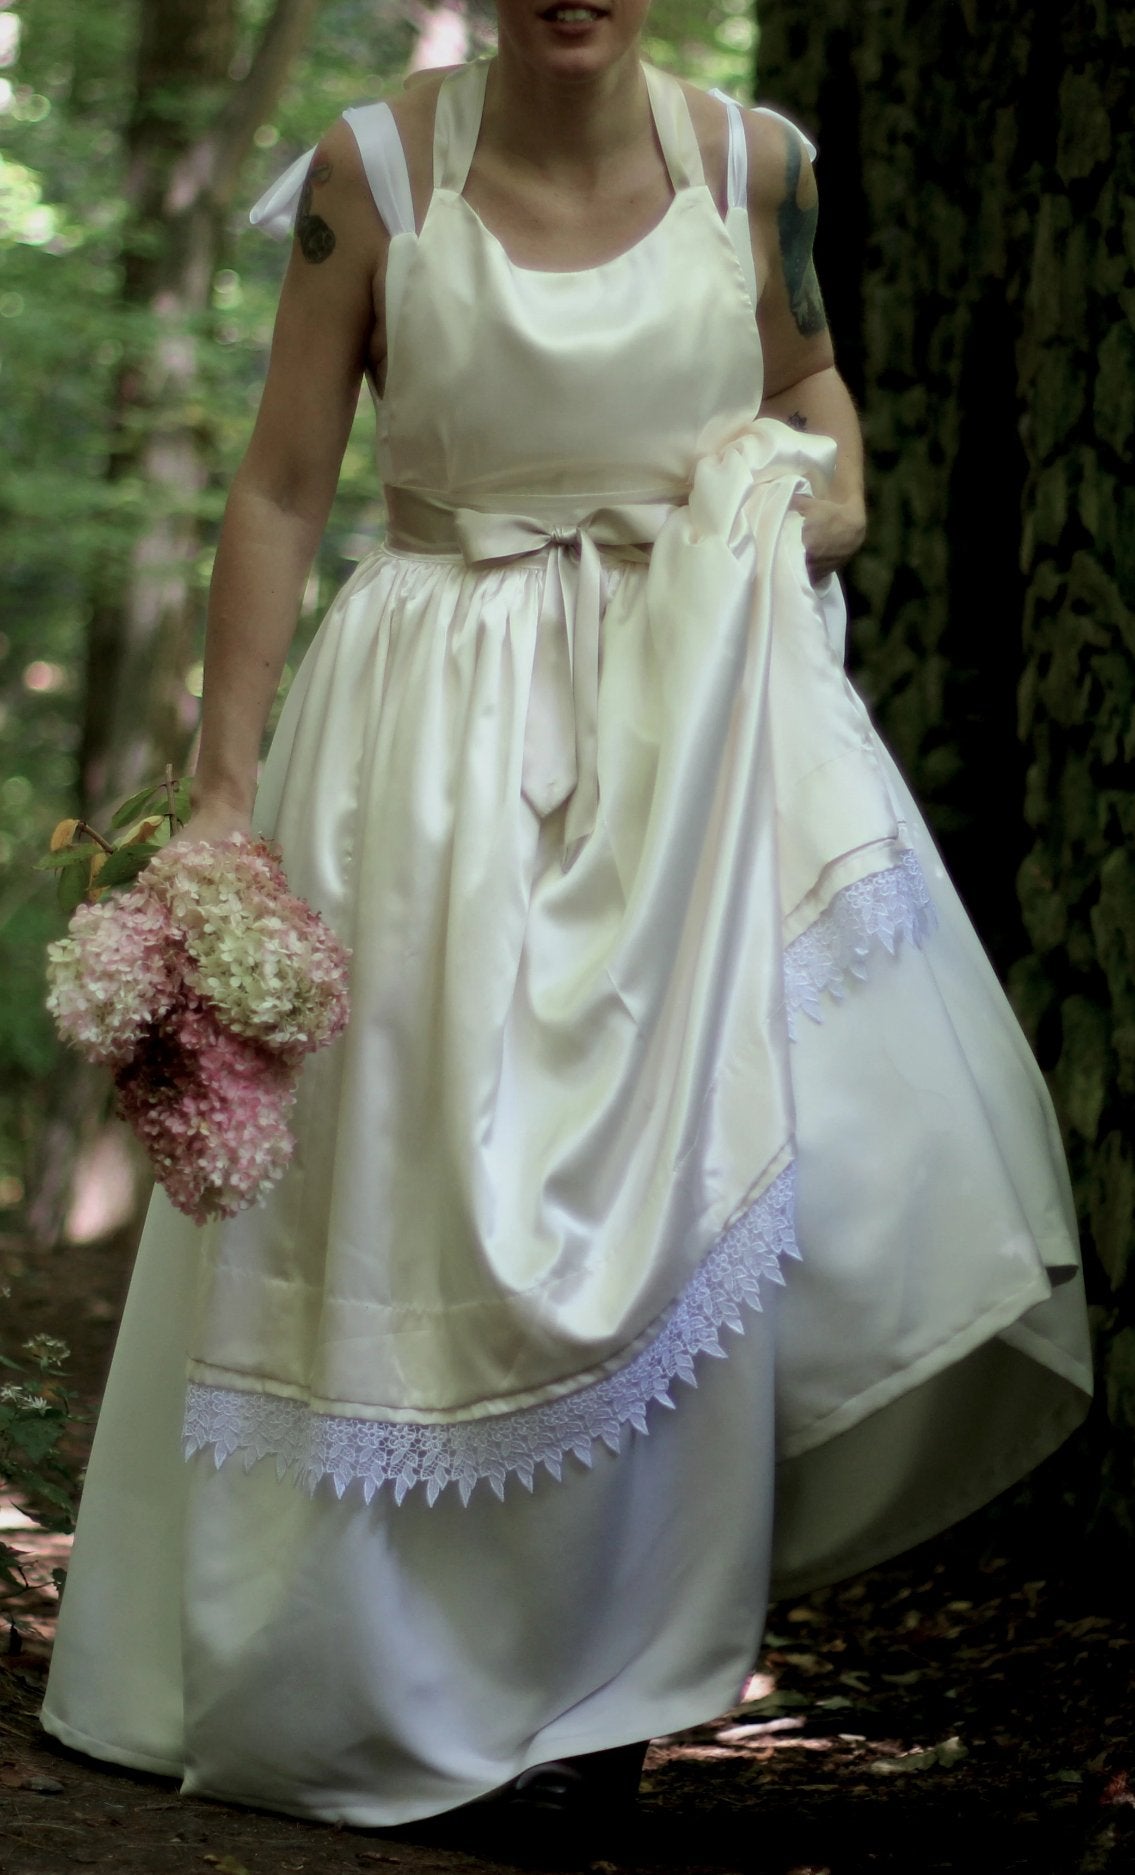 Bridal Apron in Satin, Pleats and Lace - front view 2